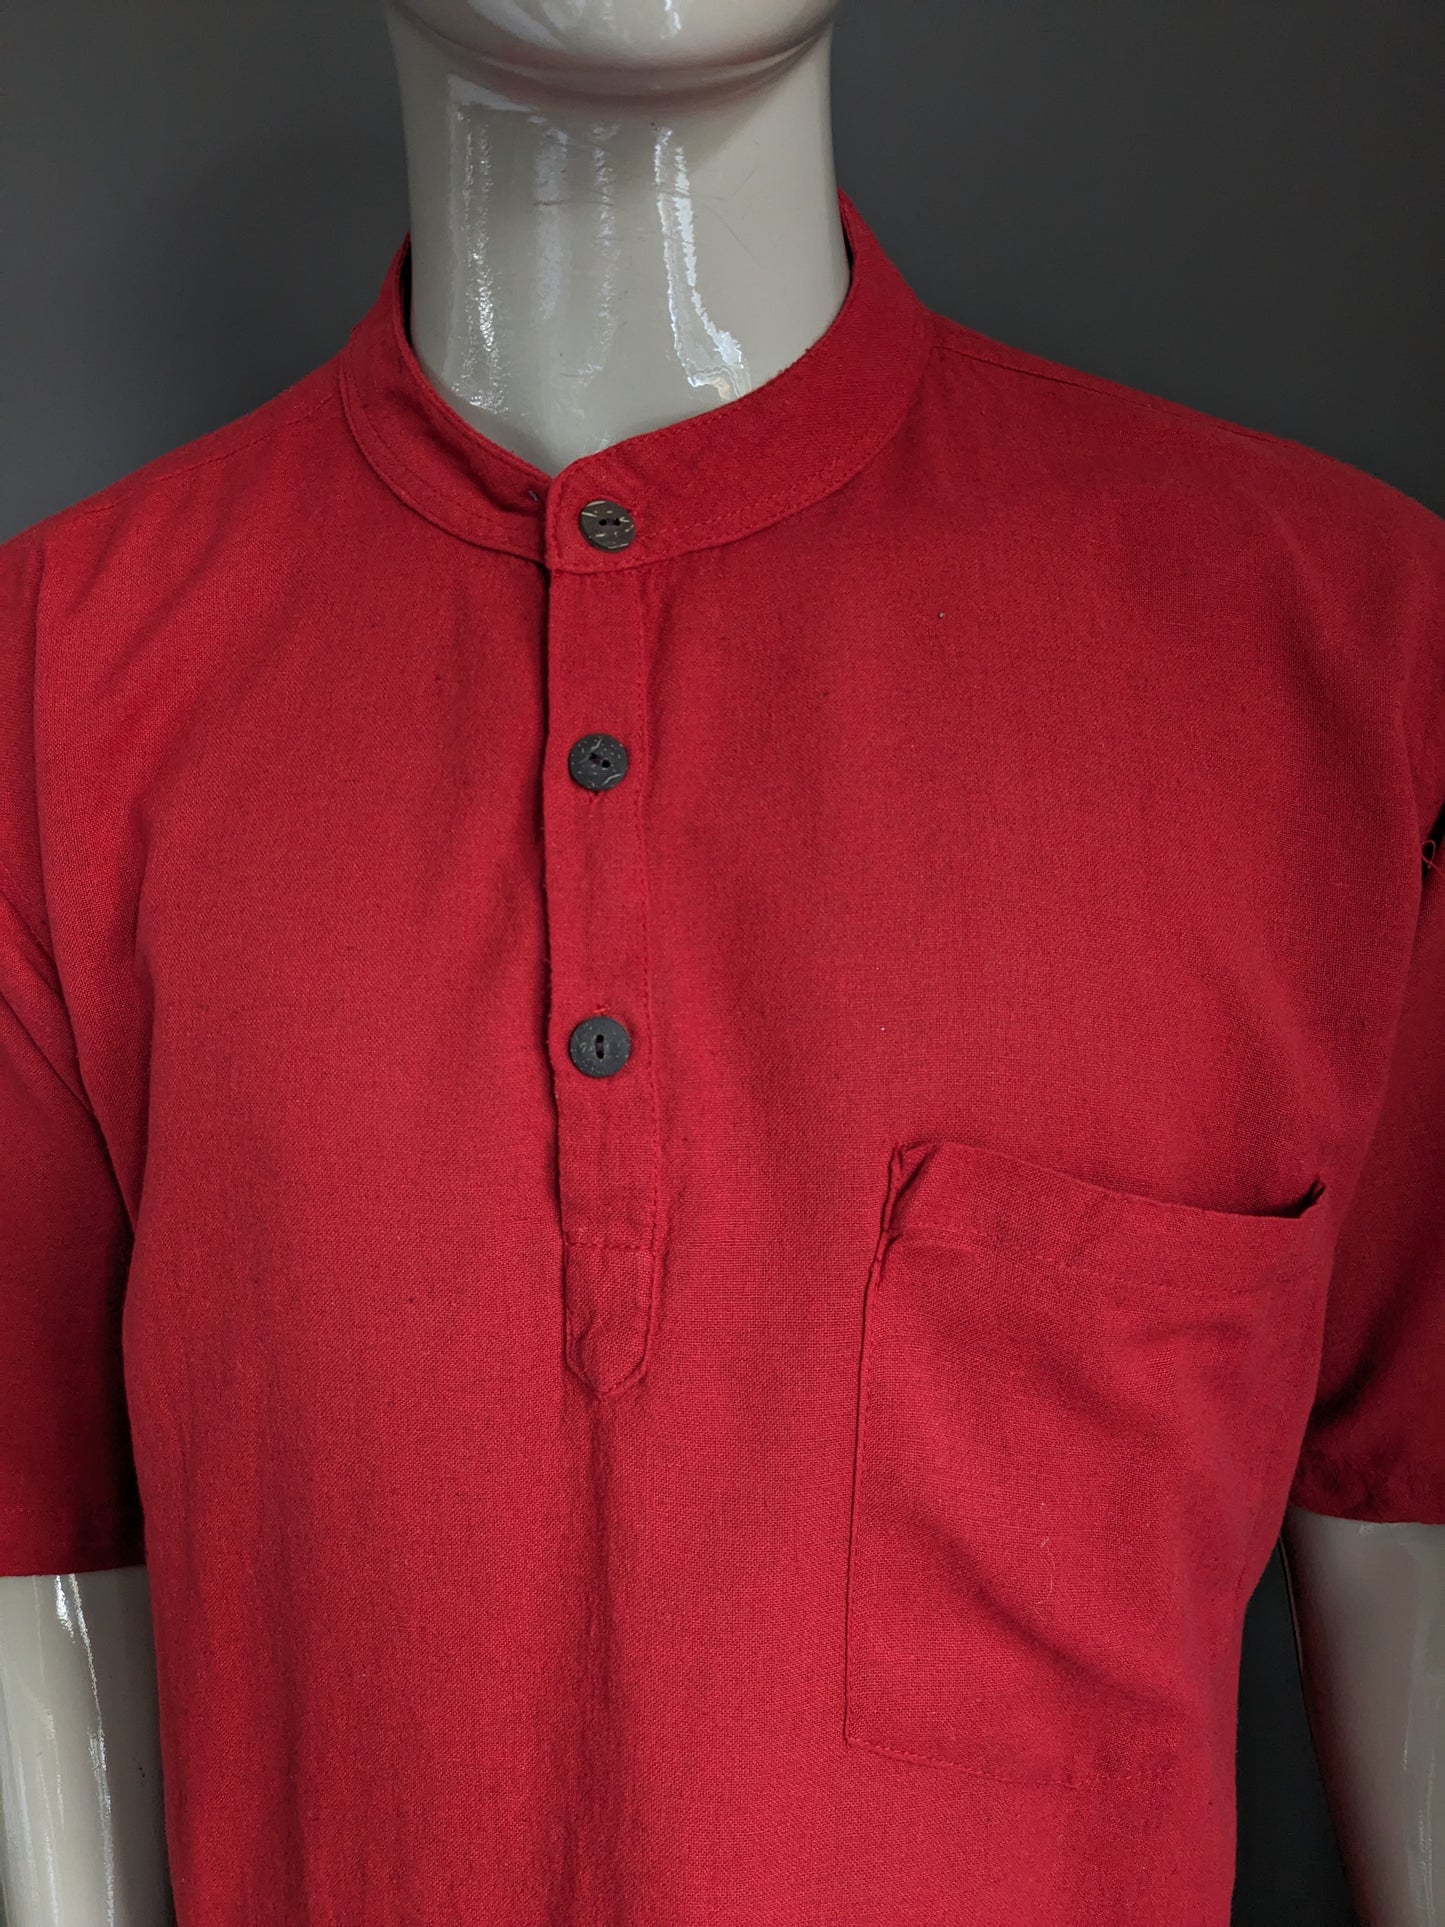 Vintage Couleurs du Monde Shirt with Mao / Farmer / Standing Collar and 1 Bag. Colored red. Size 2XL / XXL.